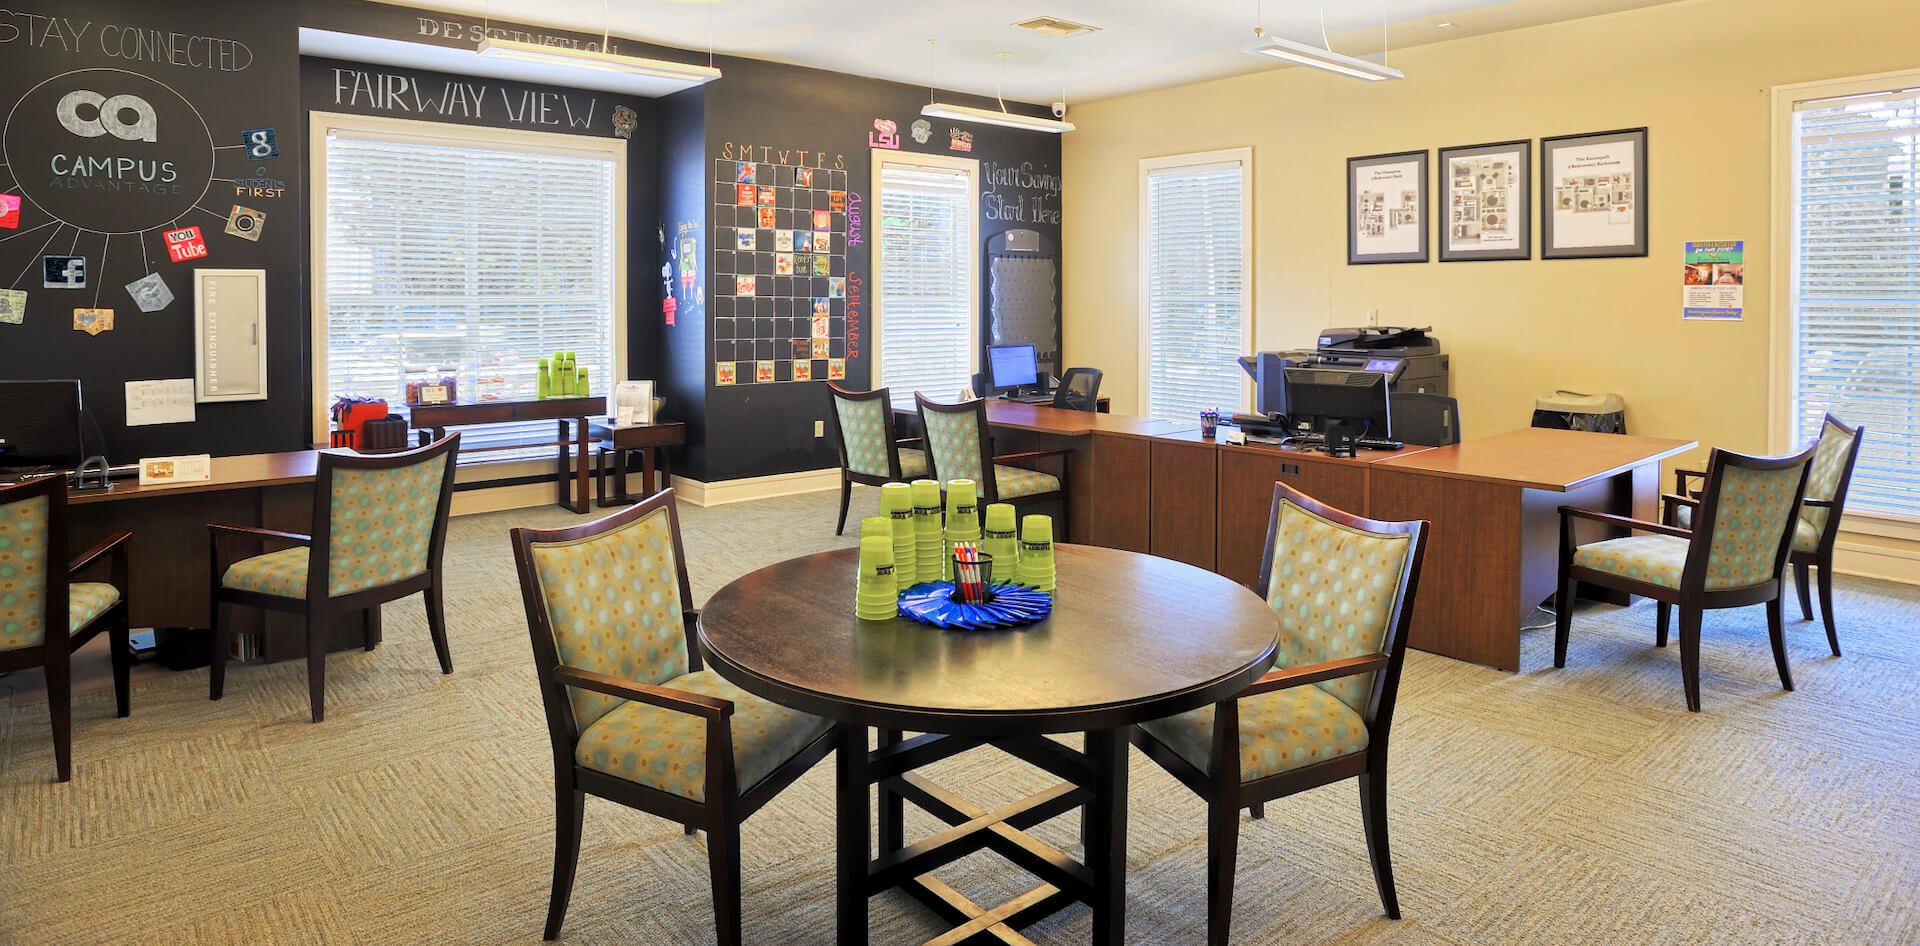 office area at fairway view apartments